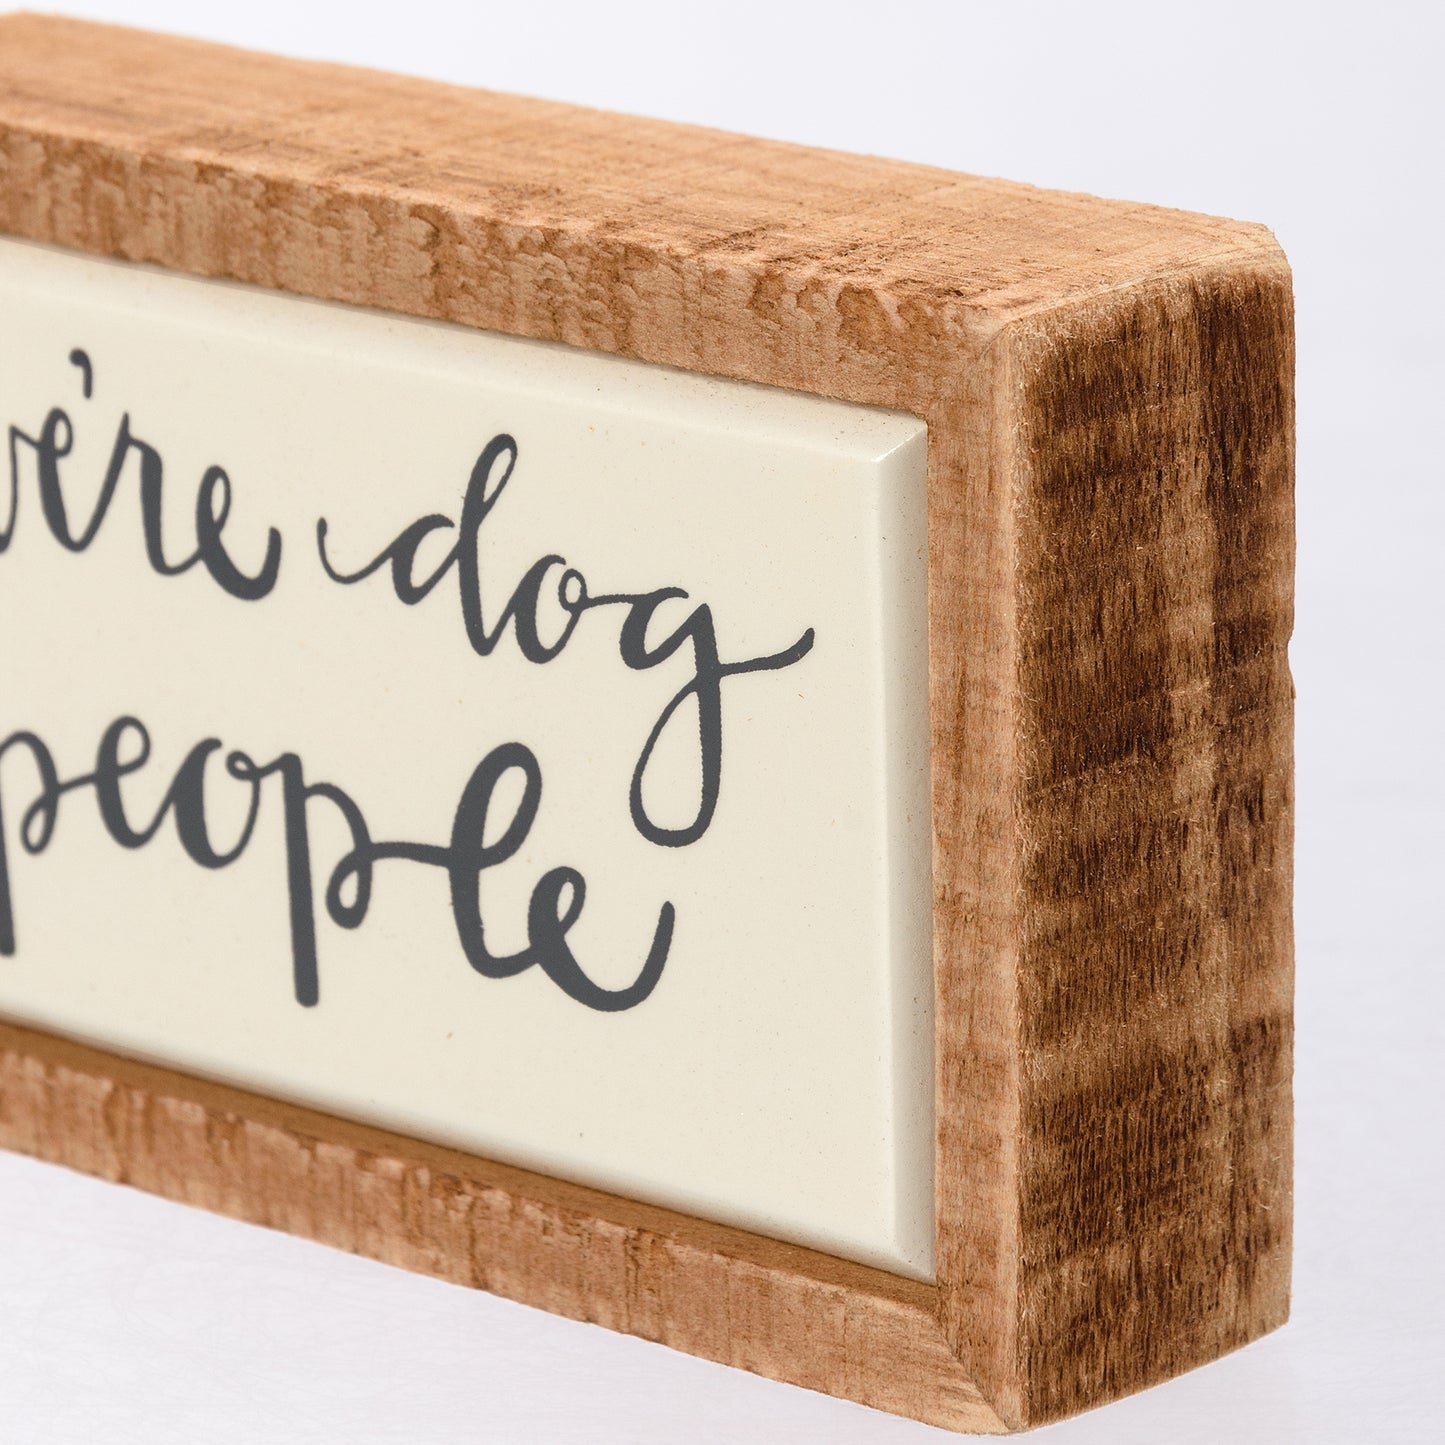 Box Sign - "We're Dog People"